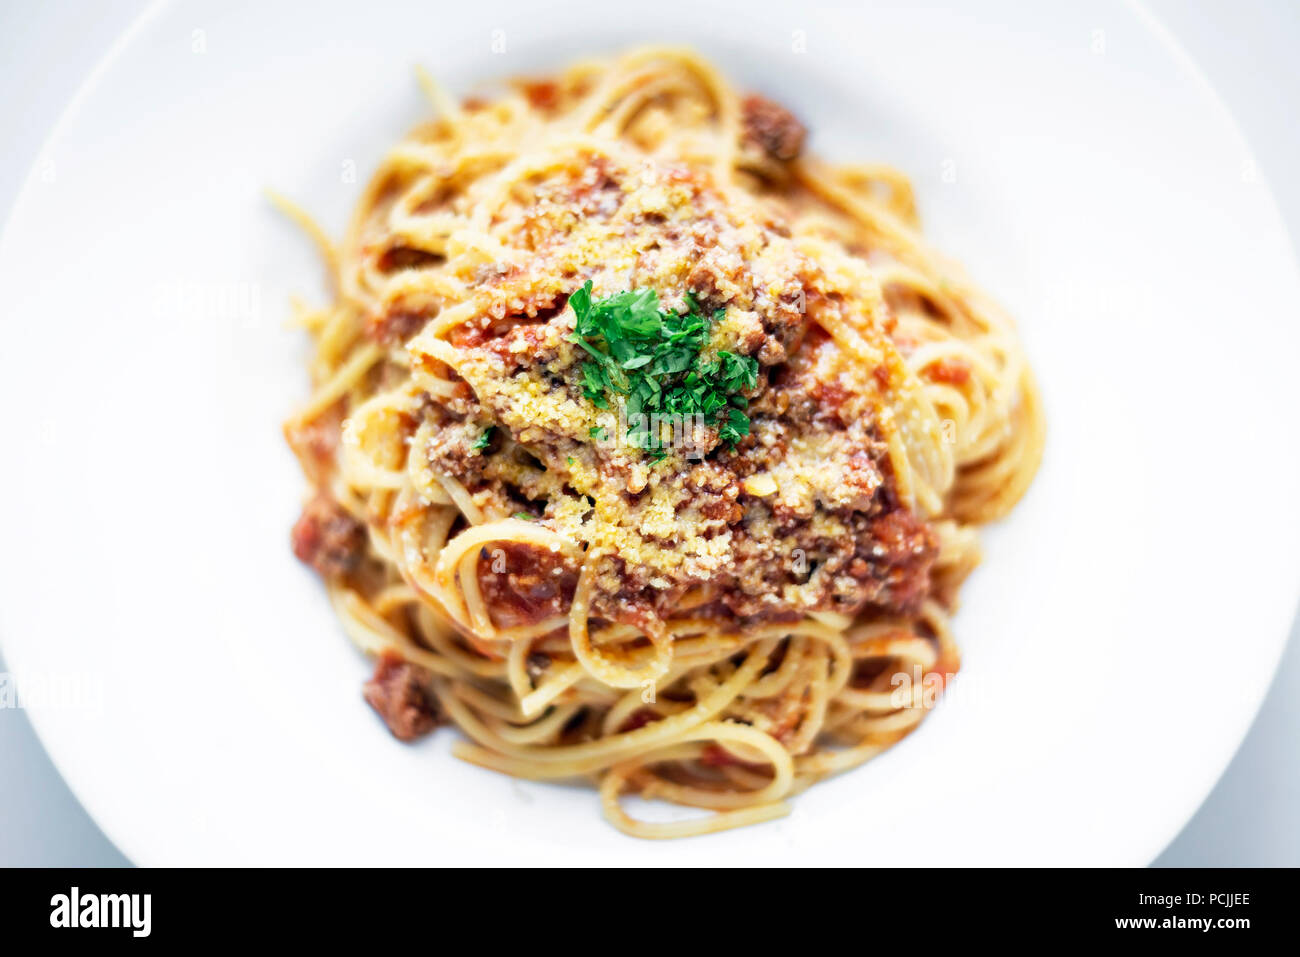 spaghetti pasta bolognaise bolognese with beef and tomato parmesan sauce dish Stock Photo